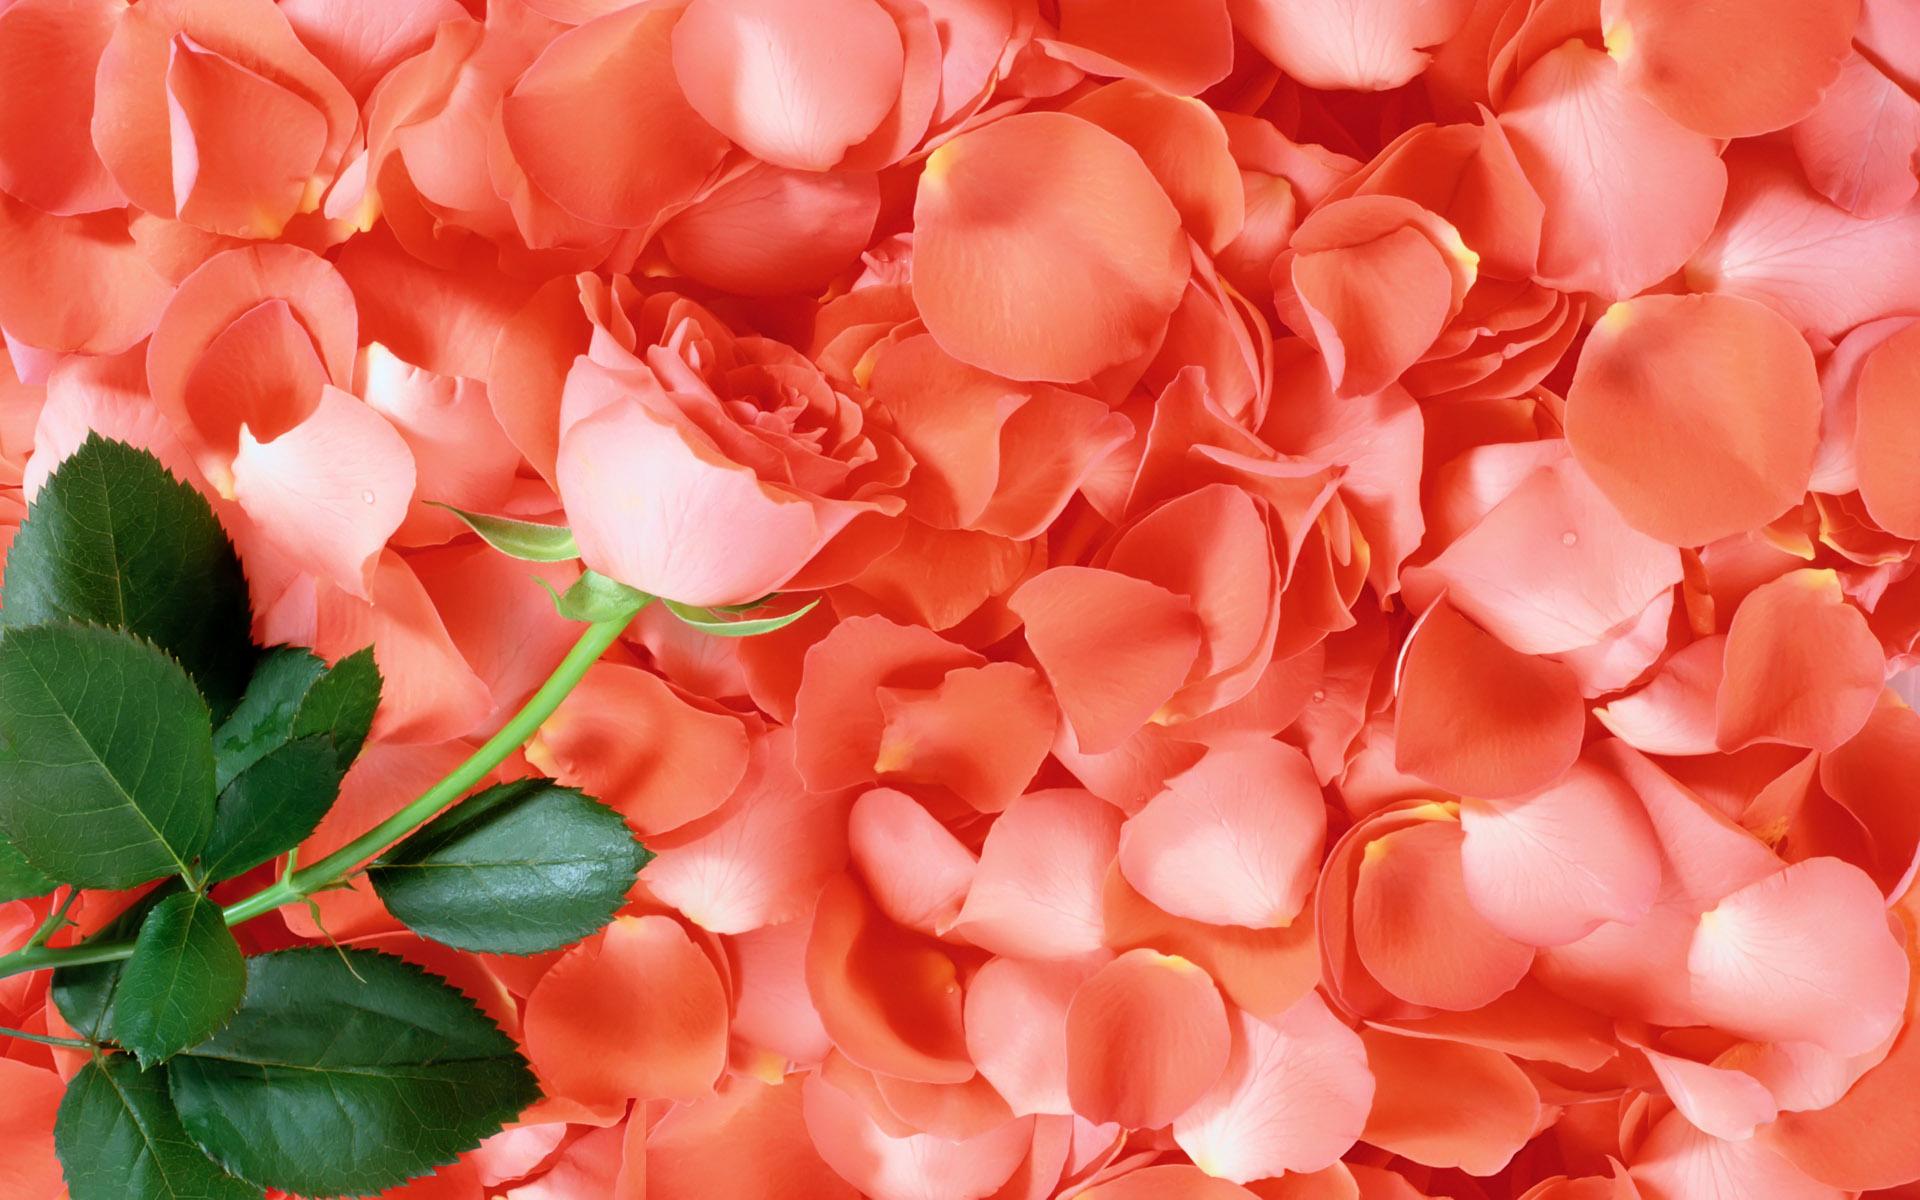 Pink Rose and Rose Petals HD Wallpaper. Background Image